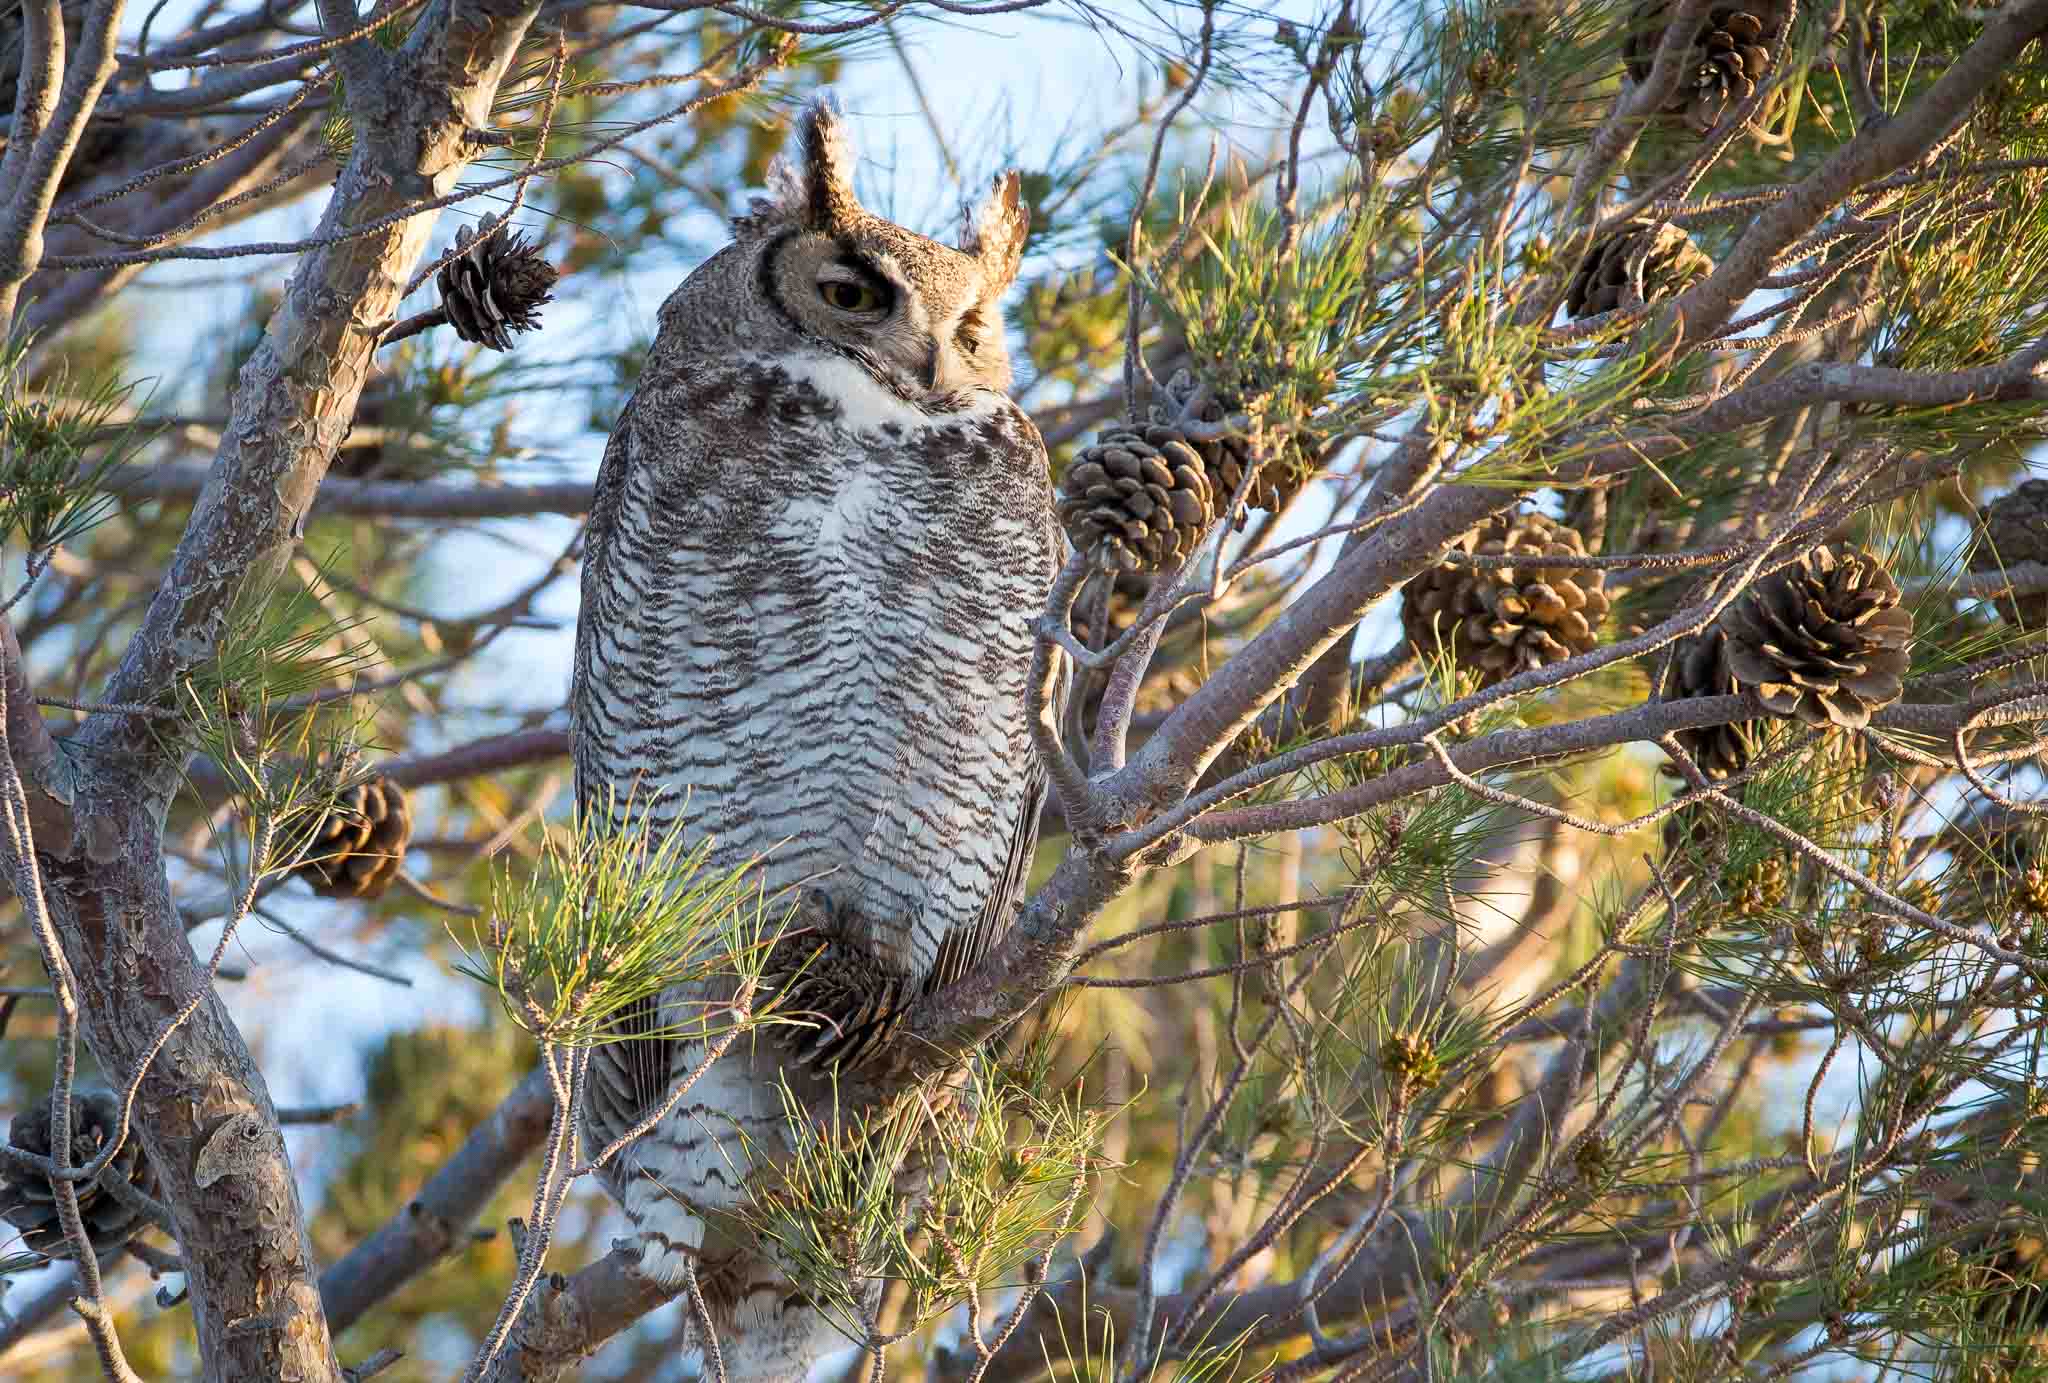 Great Horned Owl in pine, Columbus NM, March 26, 2015